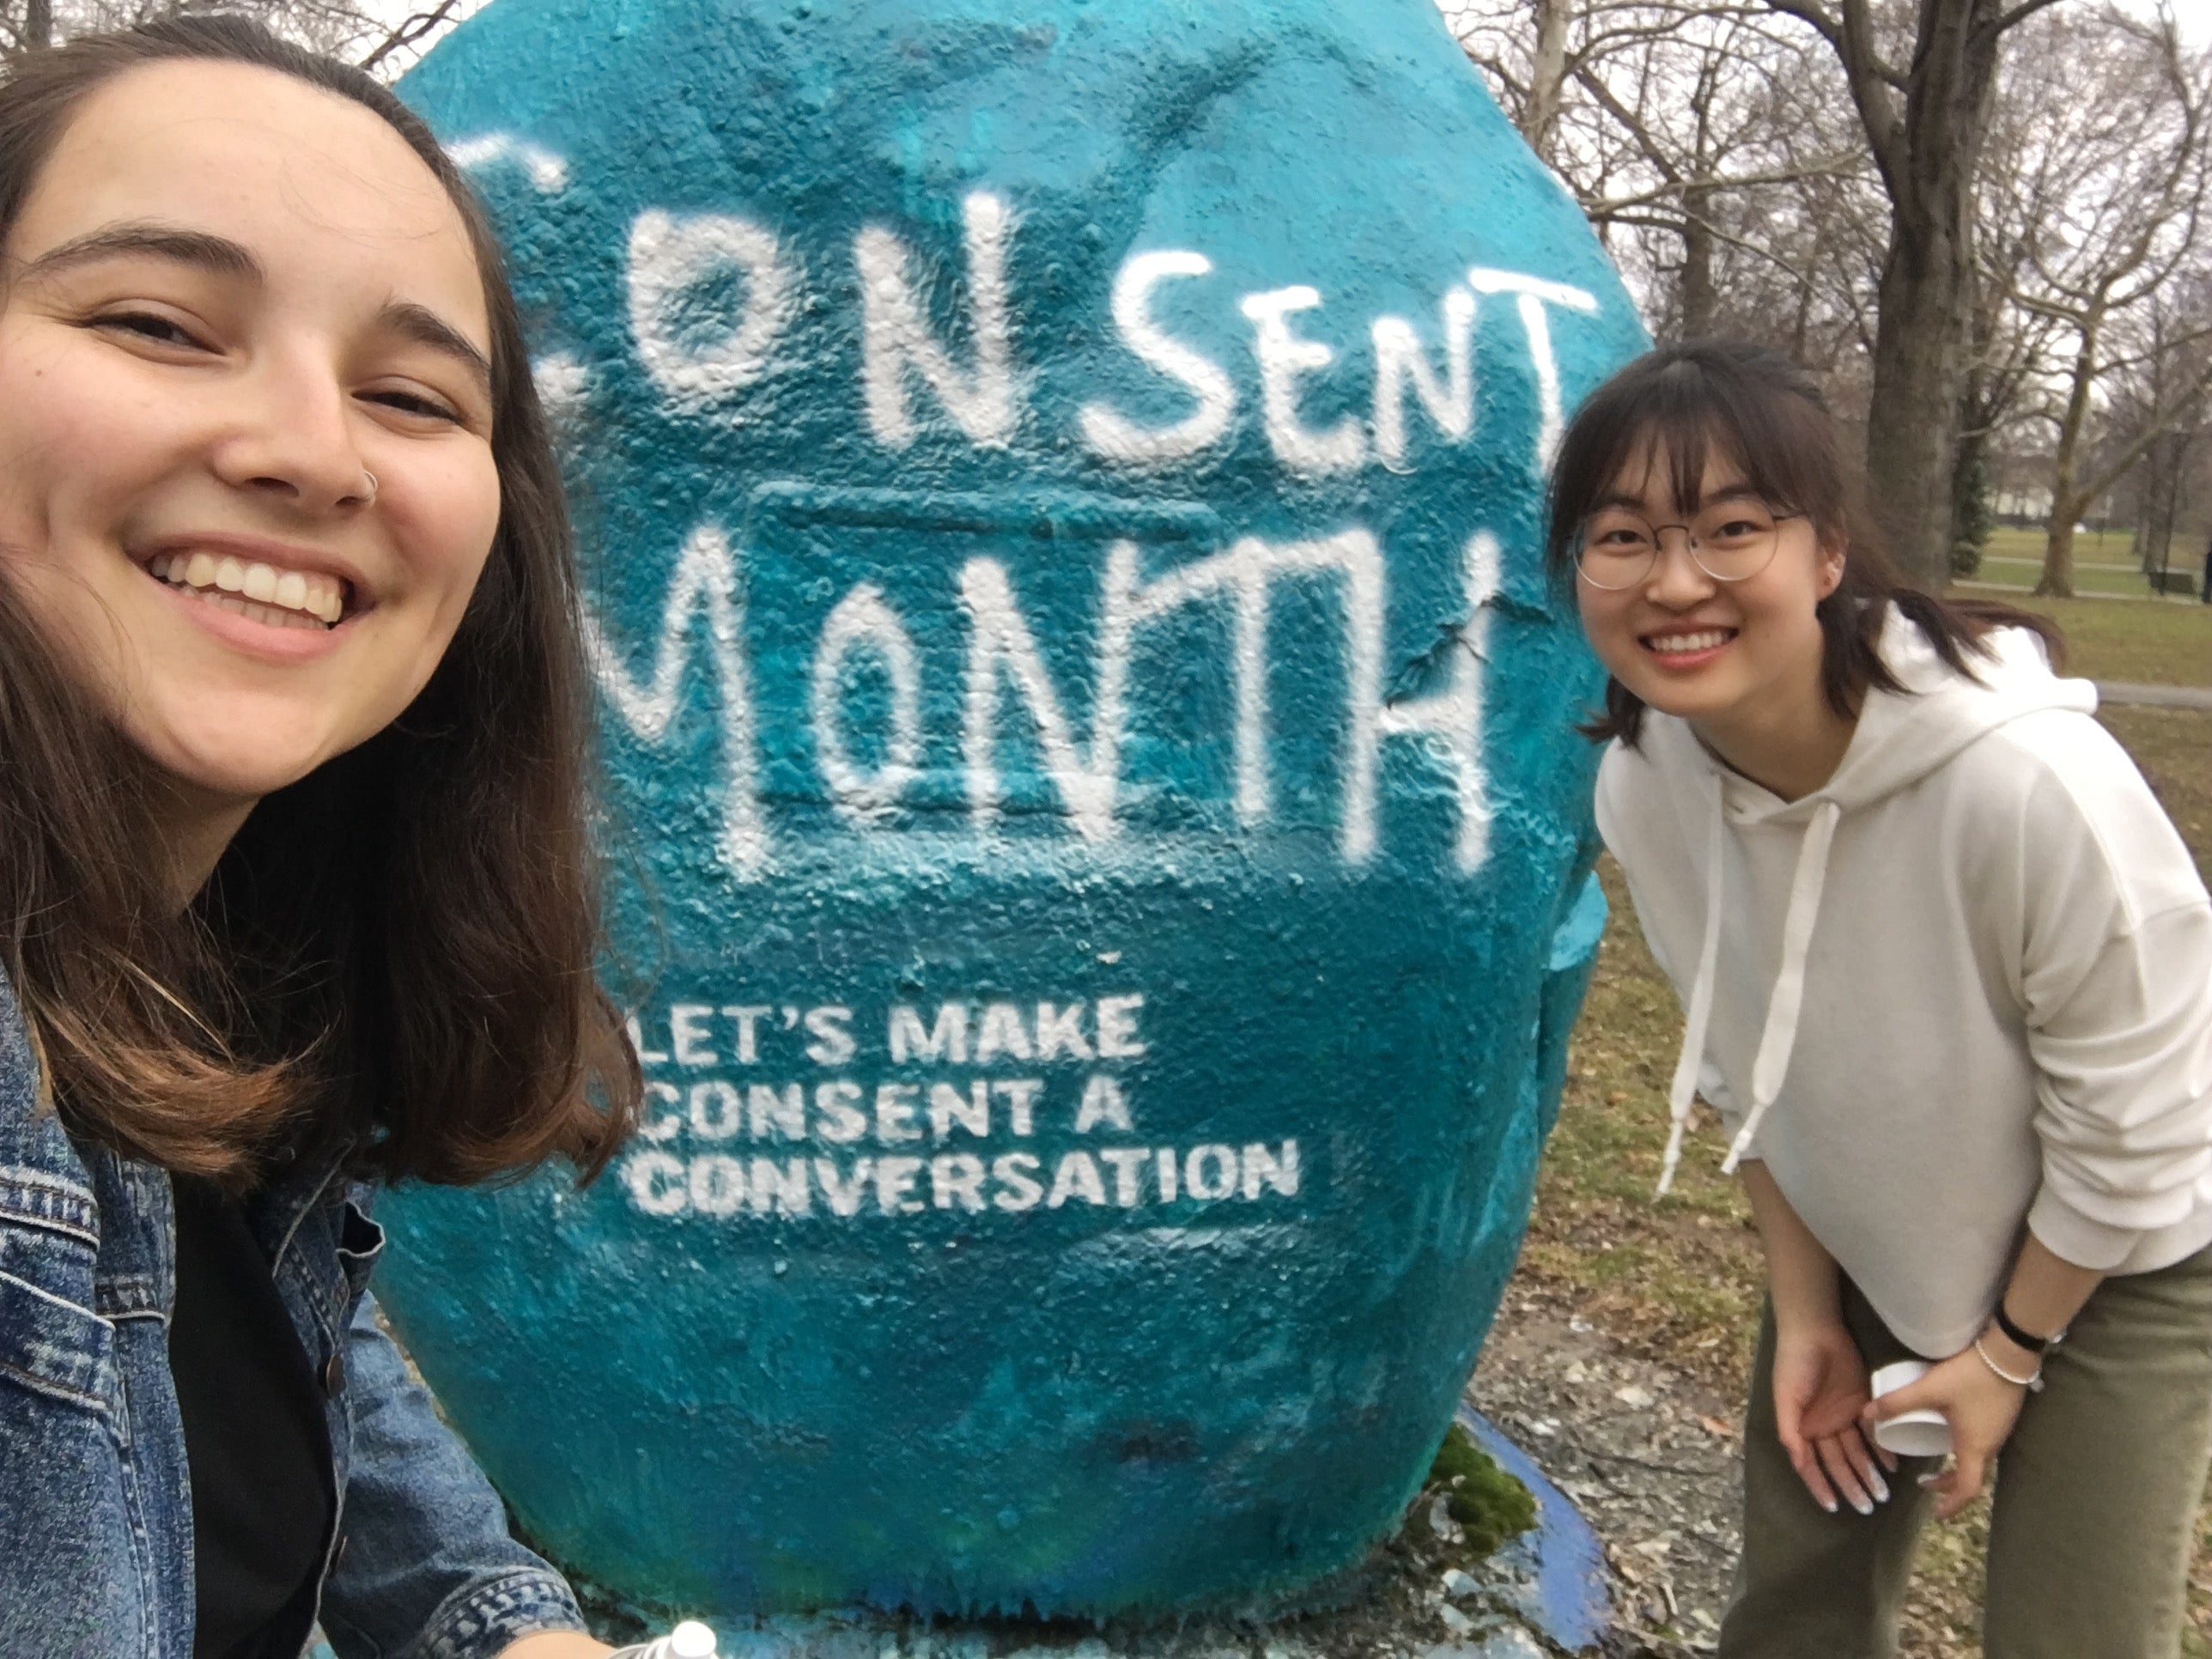 Students in front of a painted rock